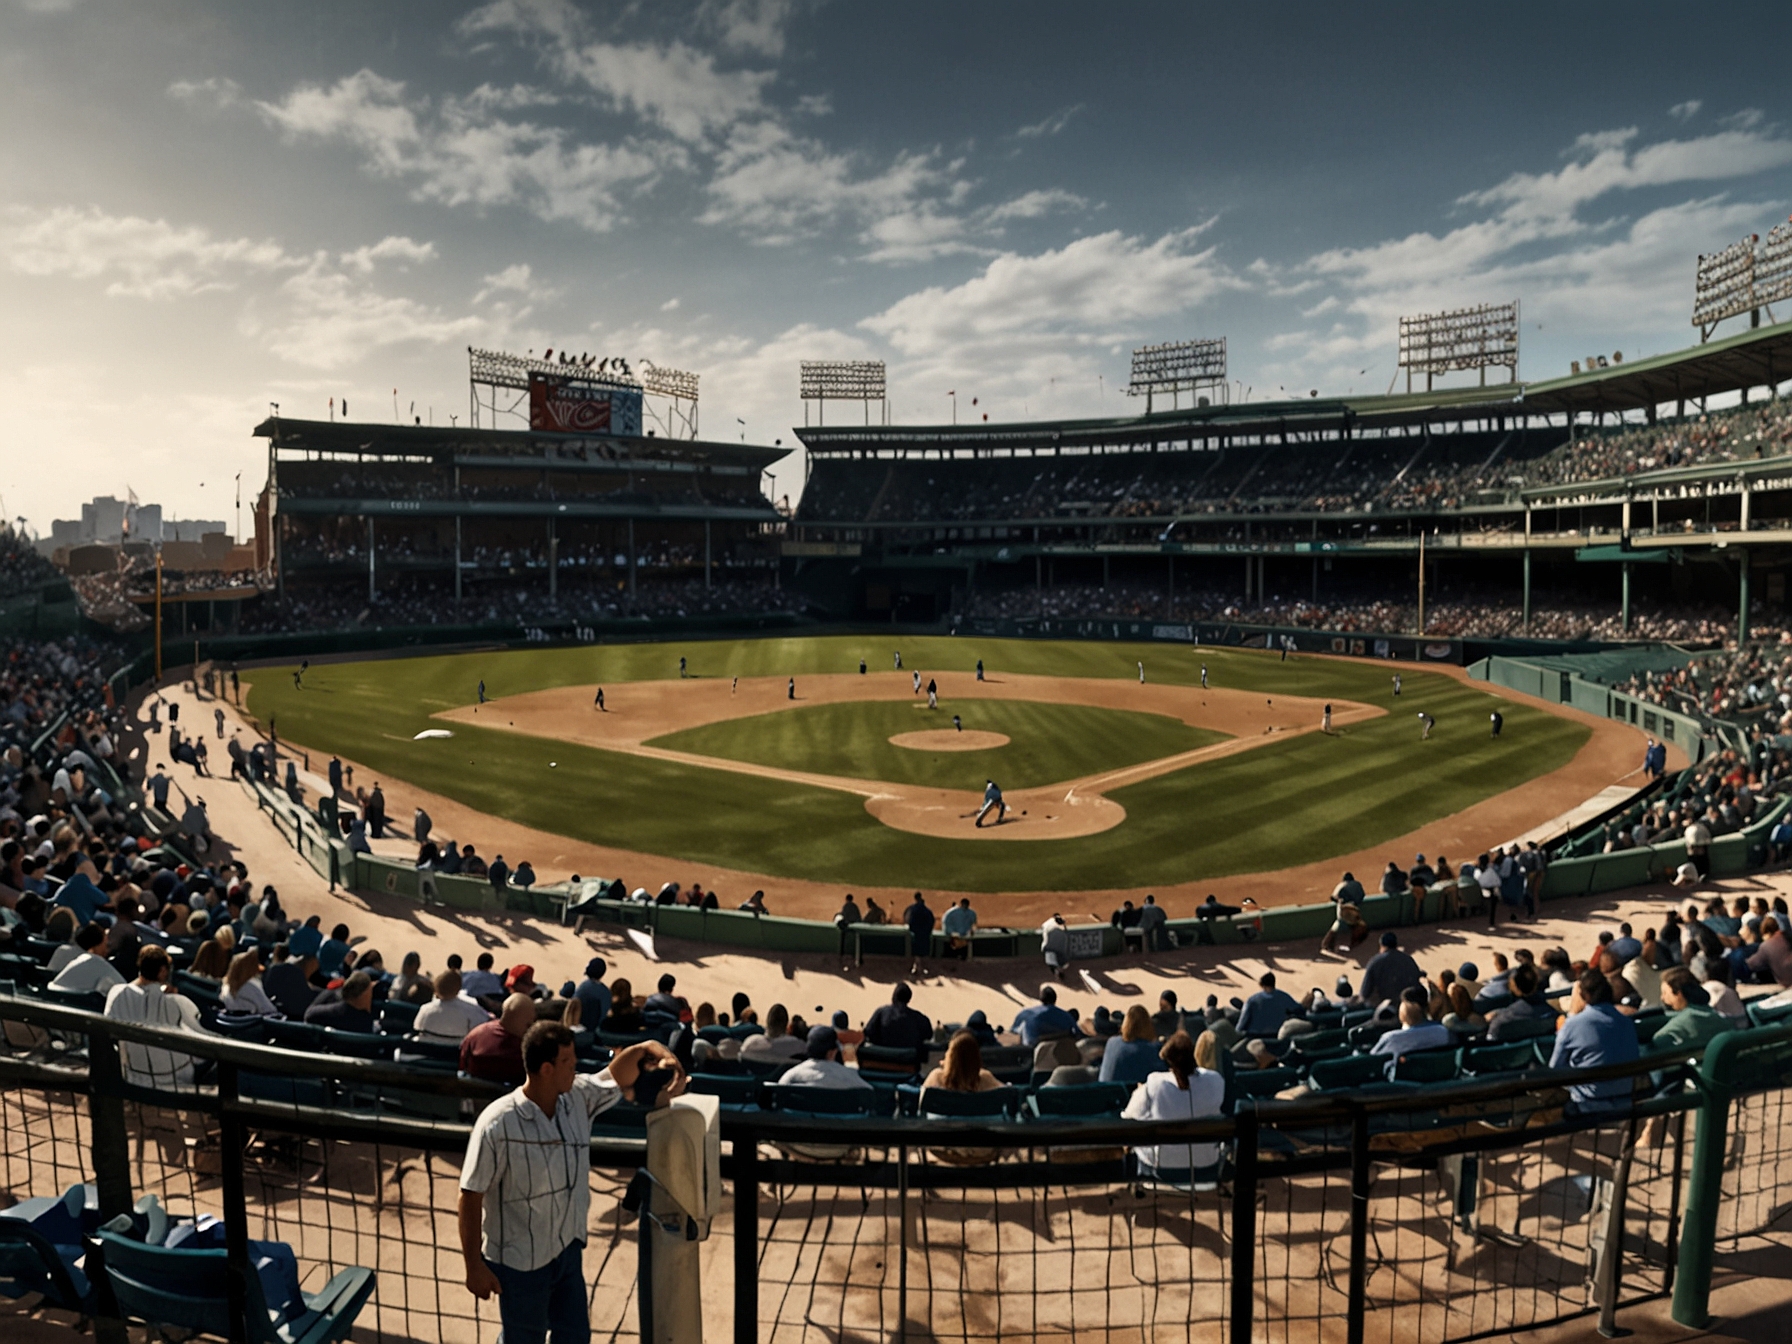 Image of Wrigley Field, the home stadium of the Chicago Cubs, bustling with fans and action.